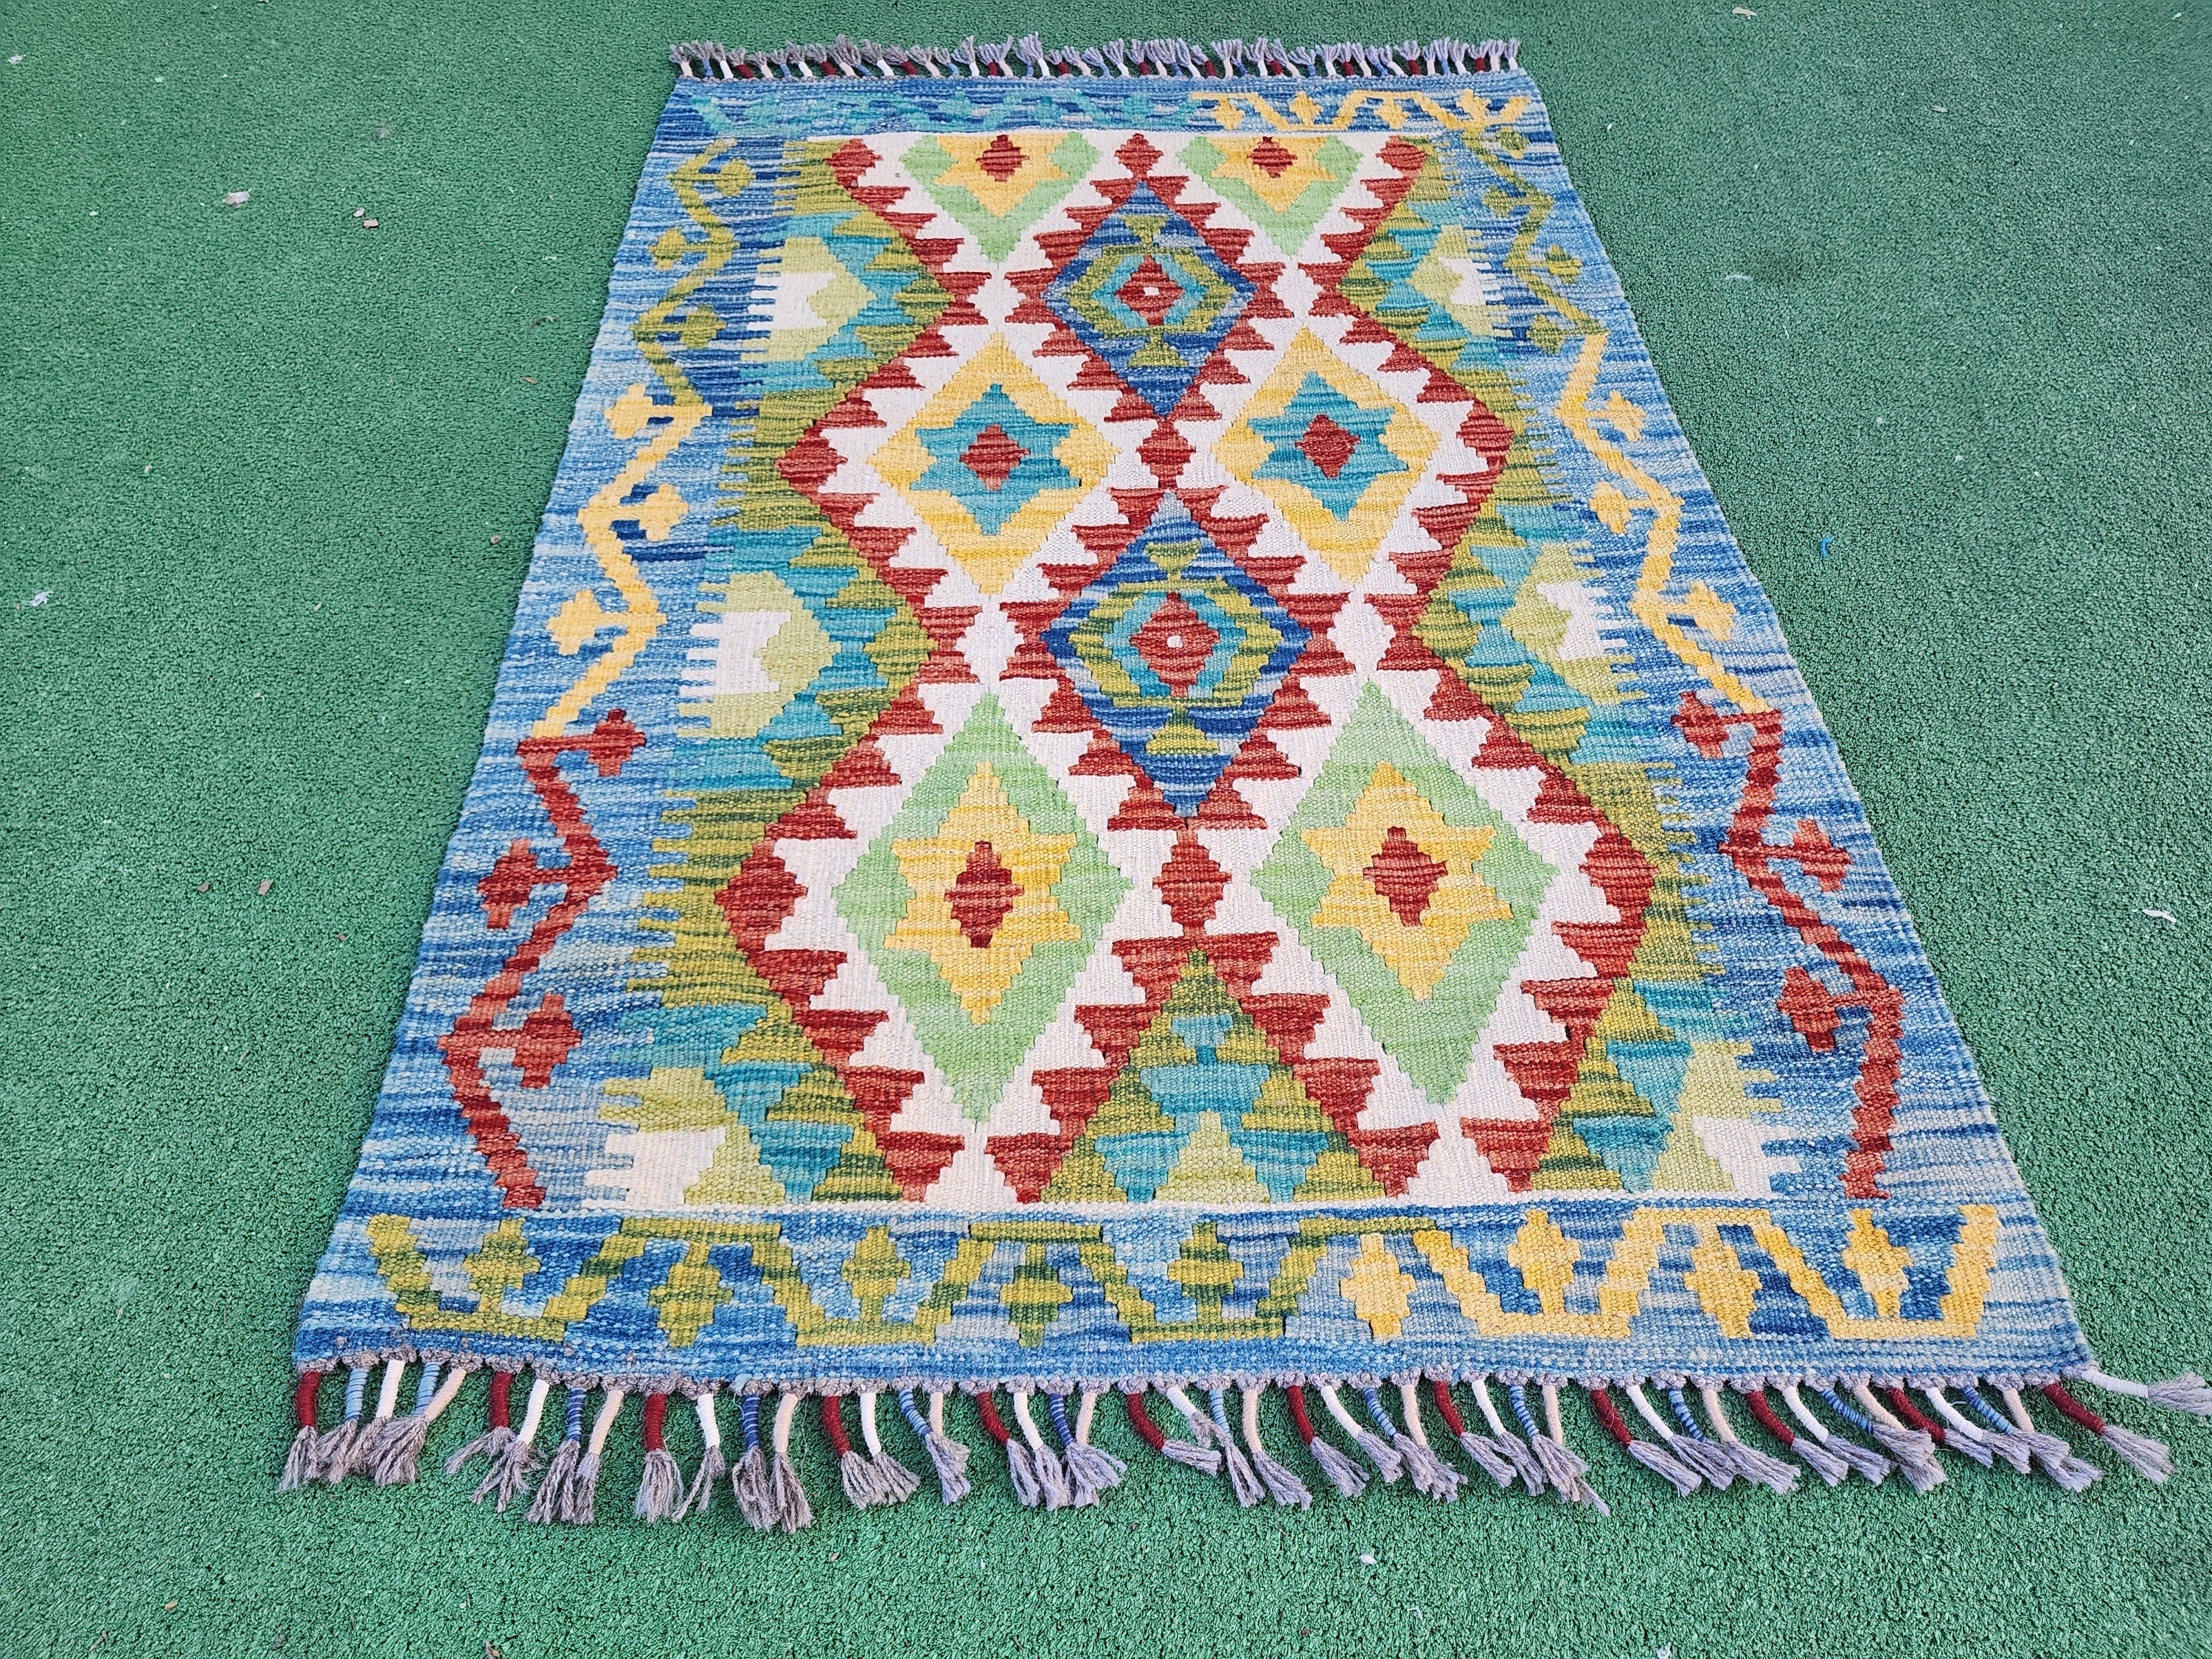 Afghan Kilim Vintage Rug 3 ft 9 in x 2 ft 6 in, Rust Red, Blue and Off-White Turkish Rug